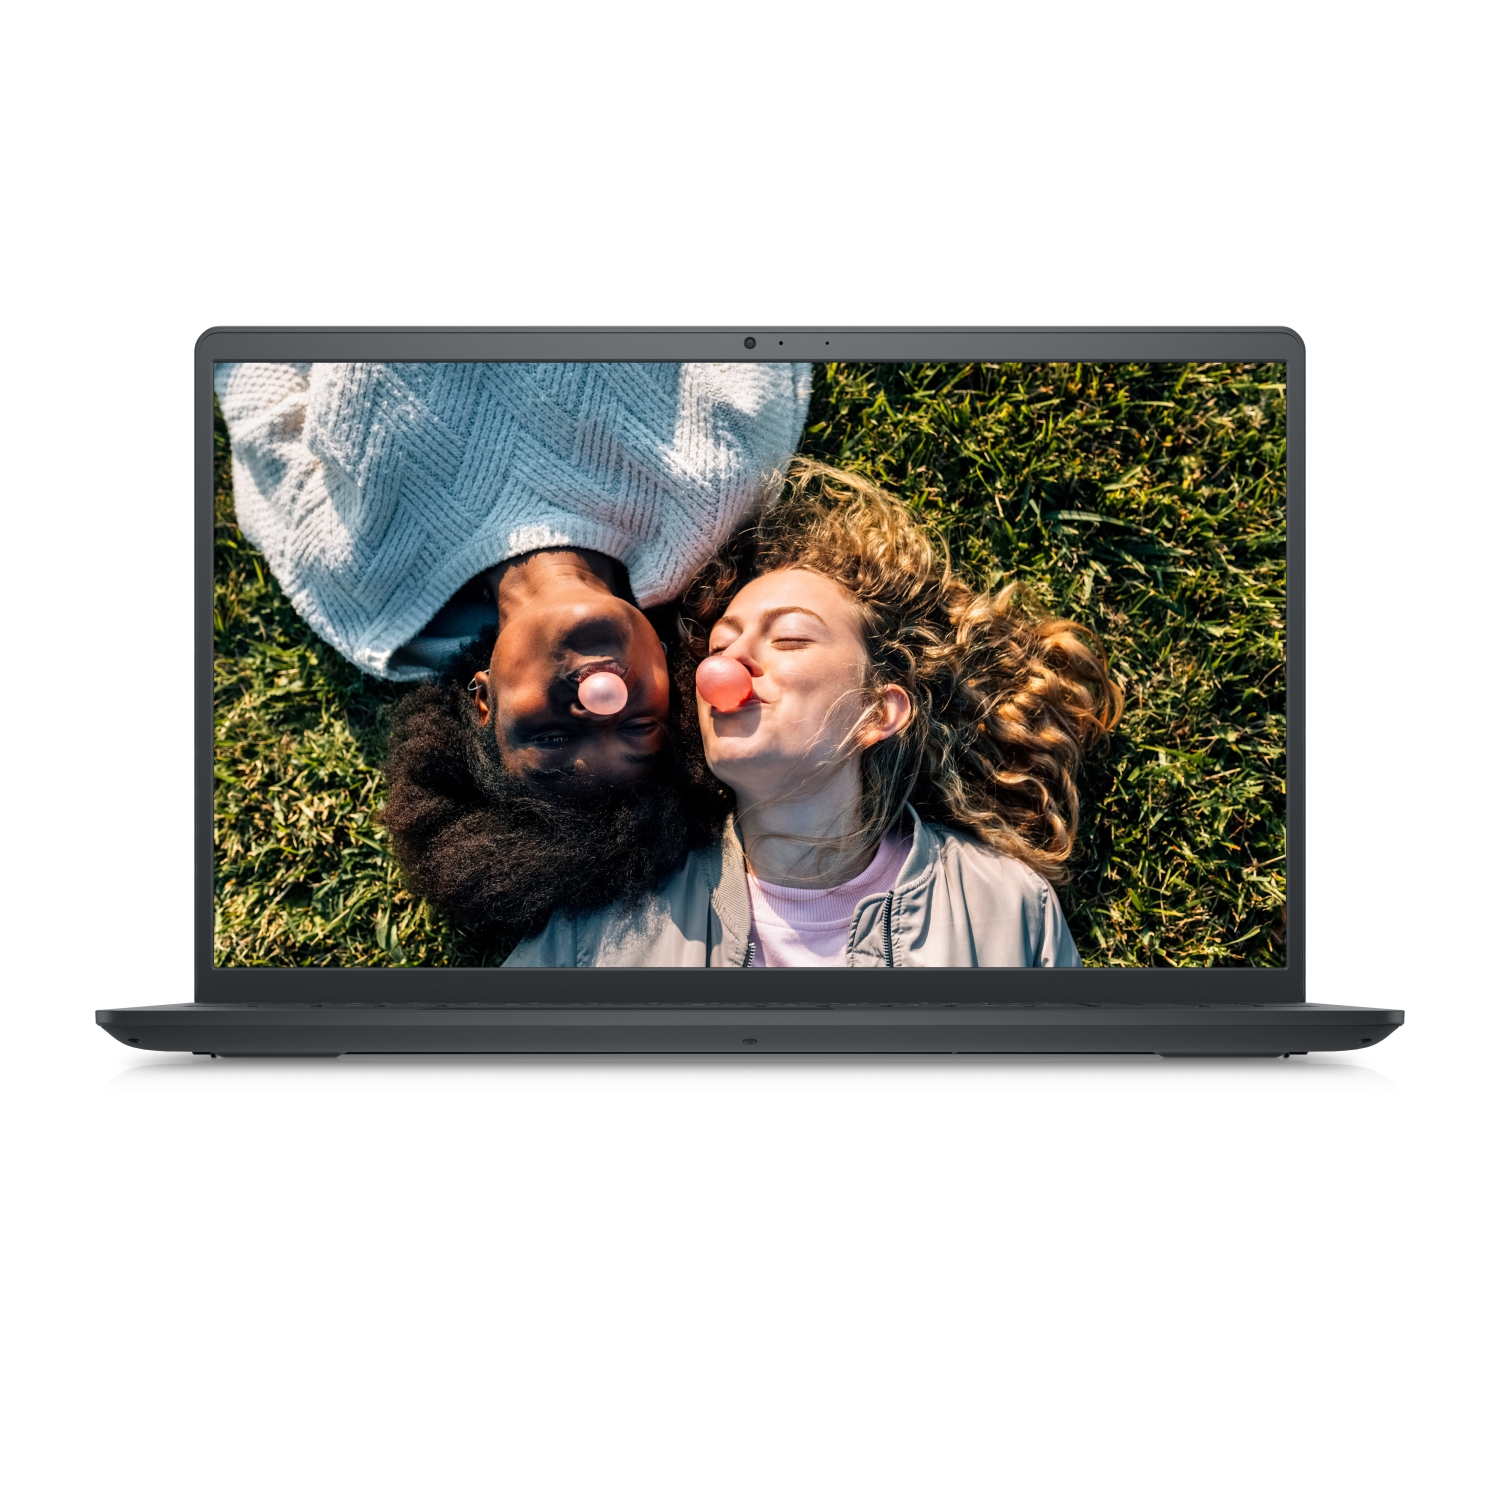 Refurbished (Excellent) – Dell Inspiron 3511 Laptop (2021) | 15.6" HD | Core i3 - 256GB SSD - 8GB RAM | 2 Cores @ 4.1 GHz - 11th Gen CPU